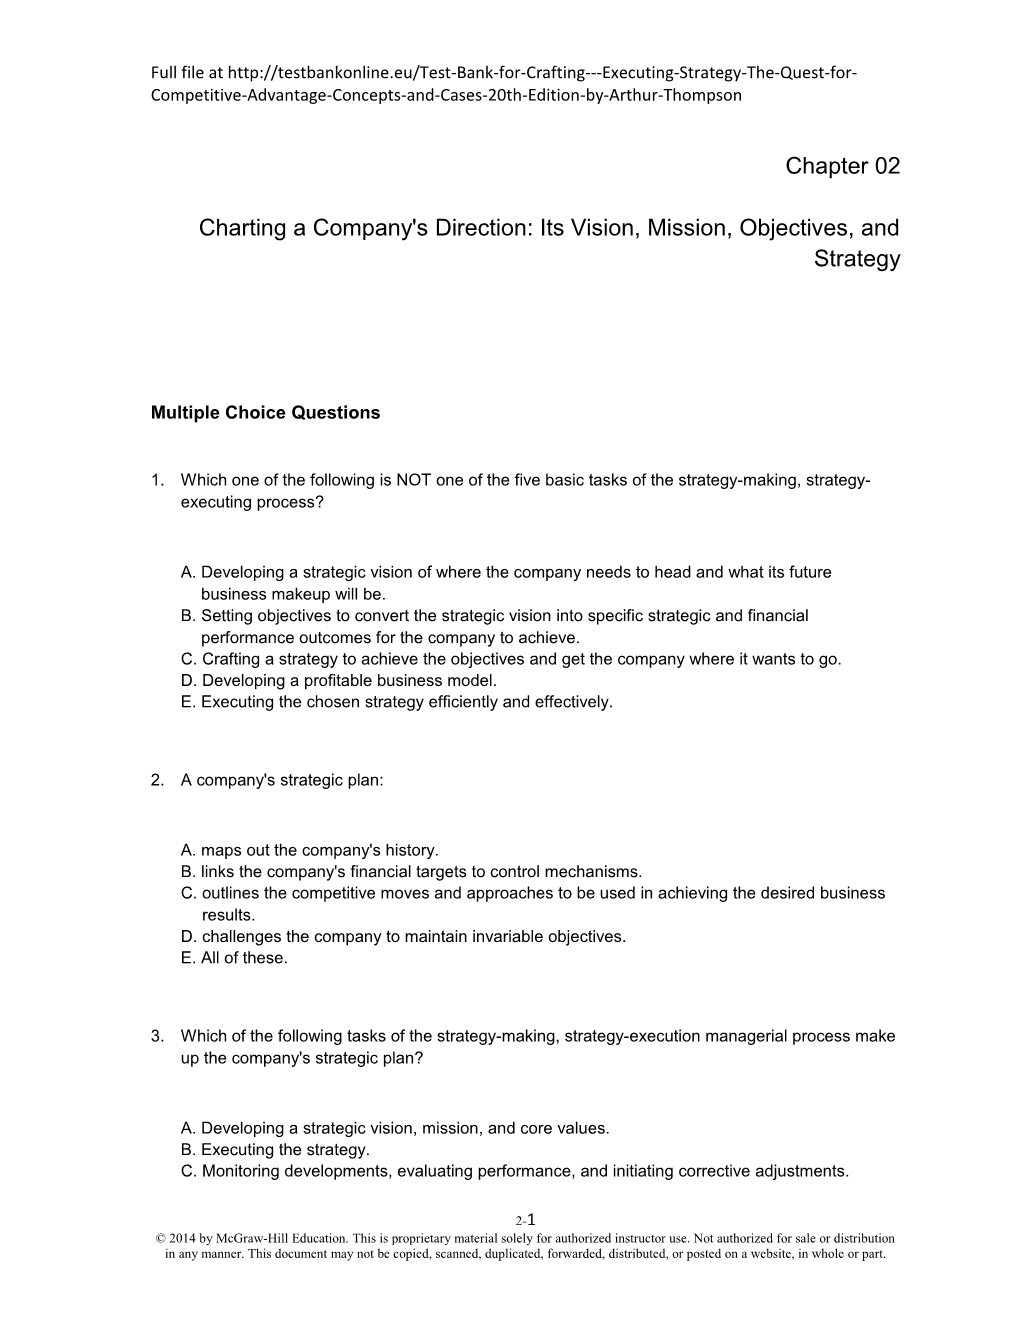 Charting a Company's Direction: Its Vision, Mission, Objectives, and Strategy